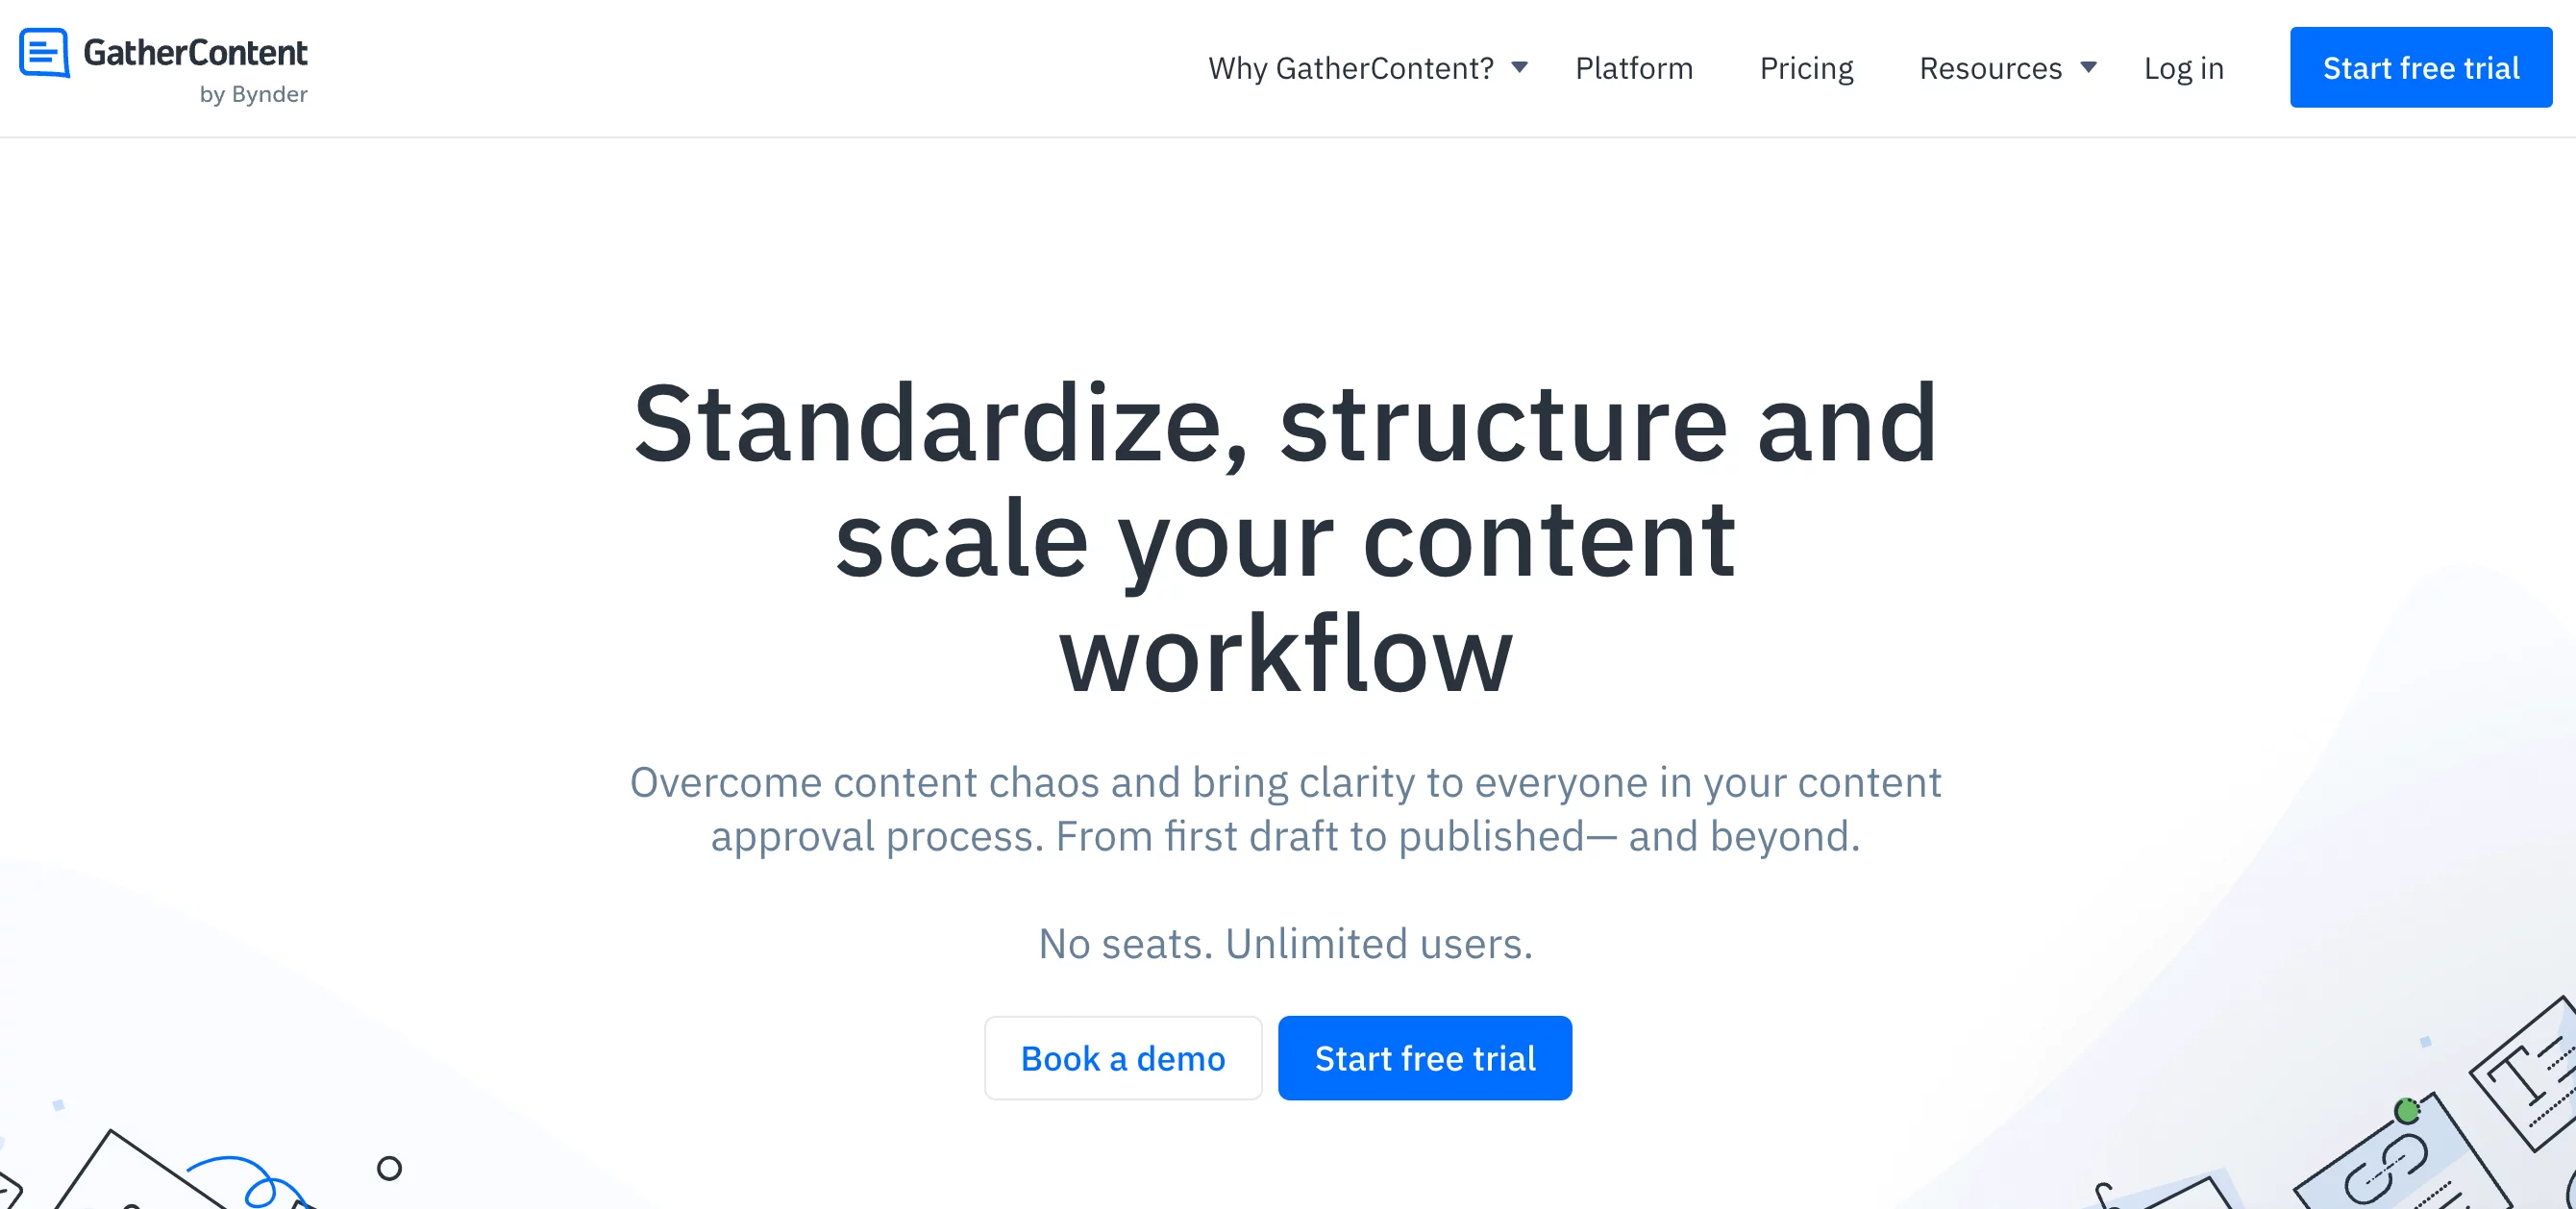 GatherContent homepage showing the motto "Standardize, structure and scale your content workflow".